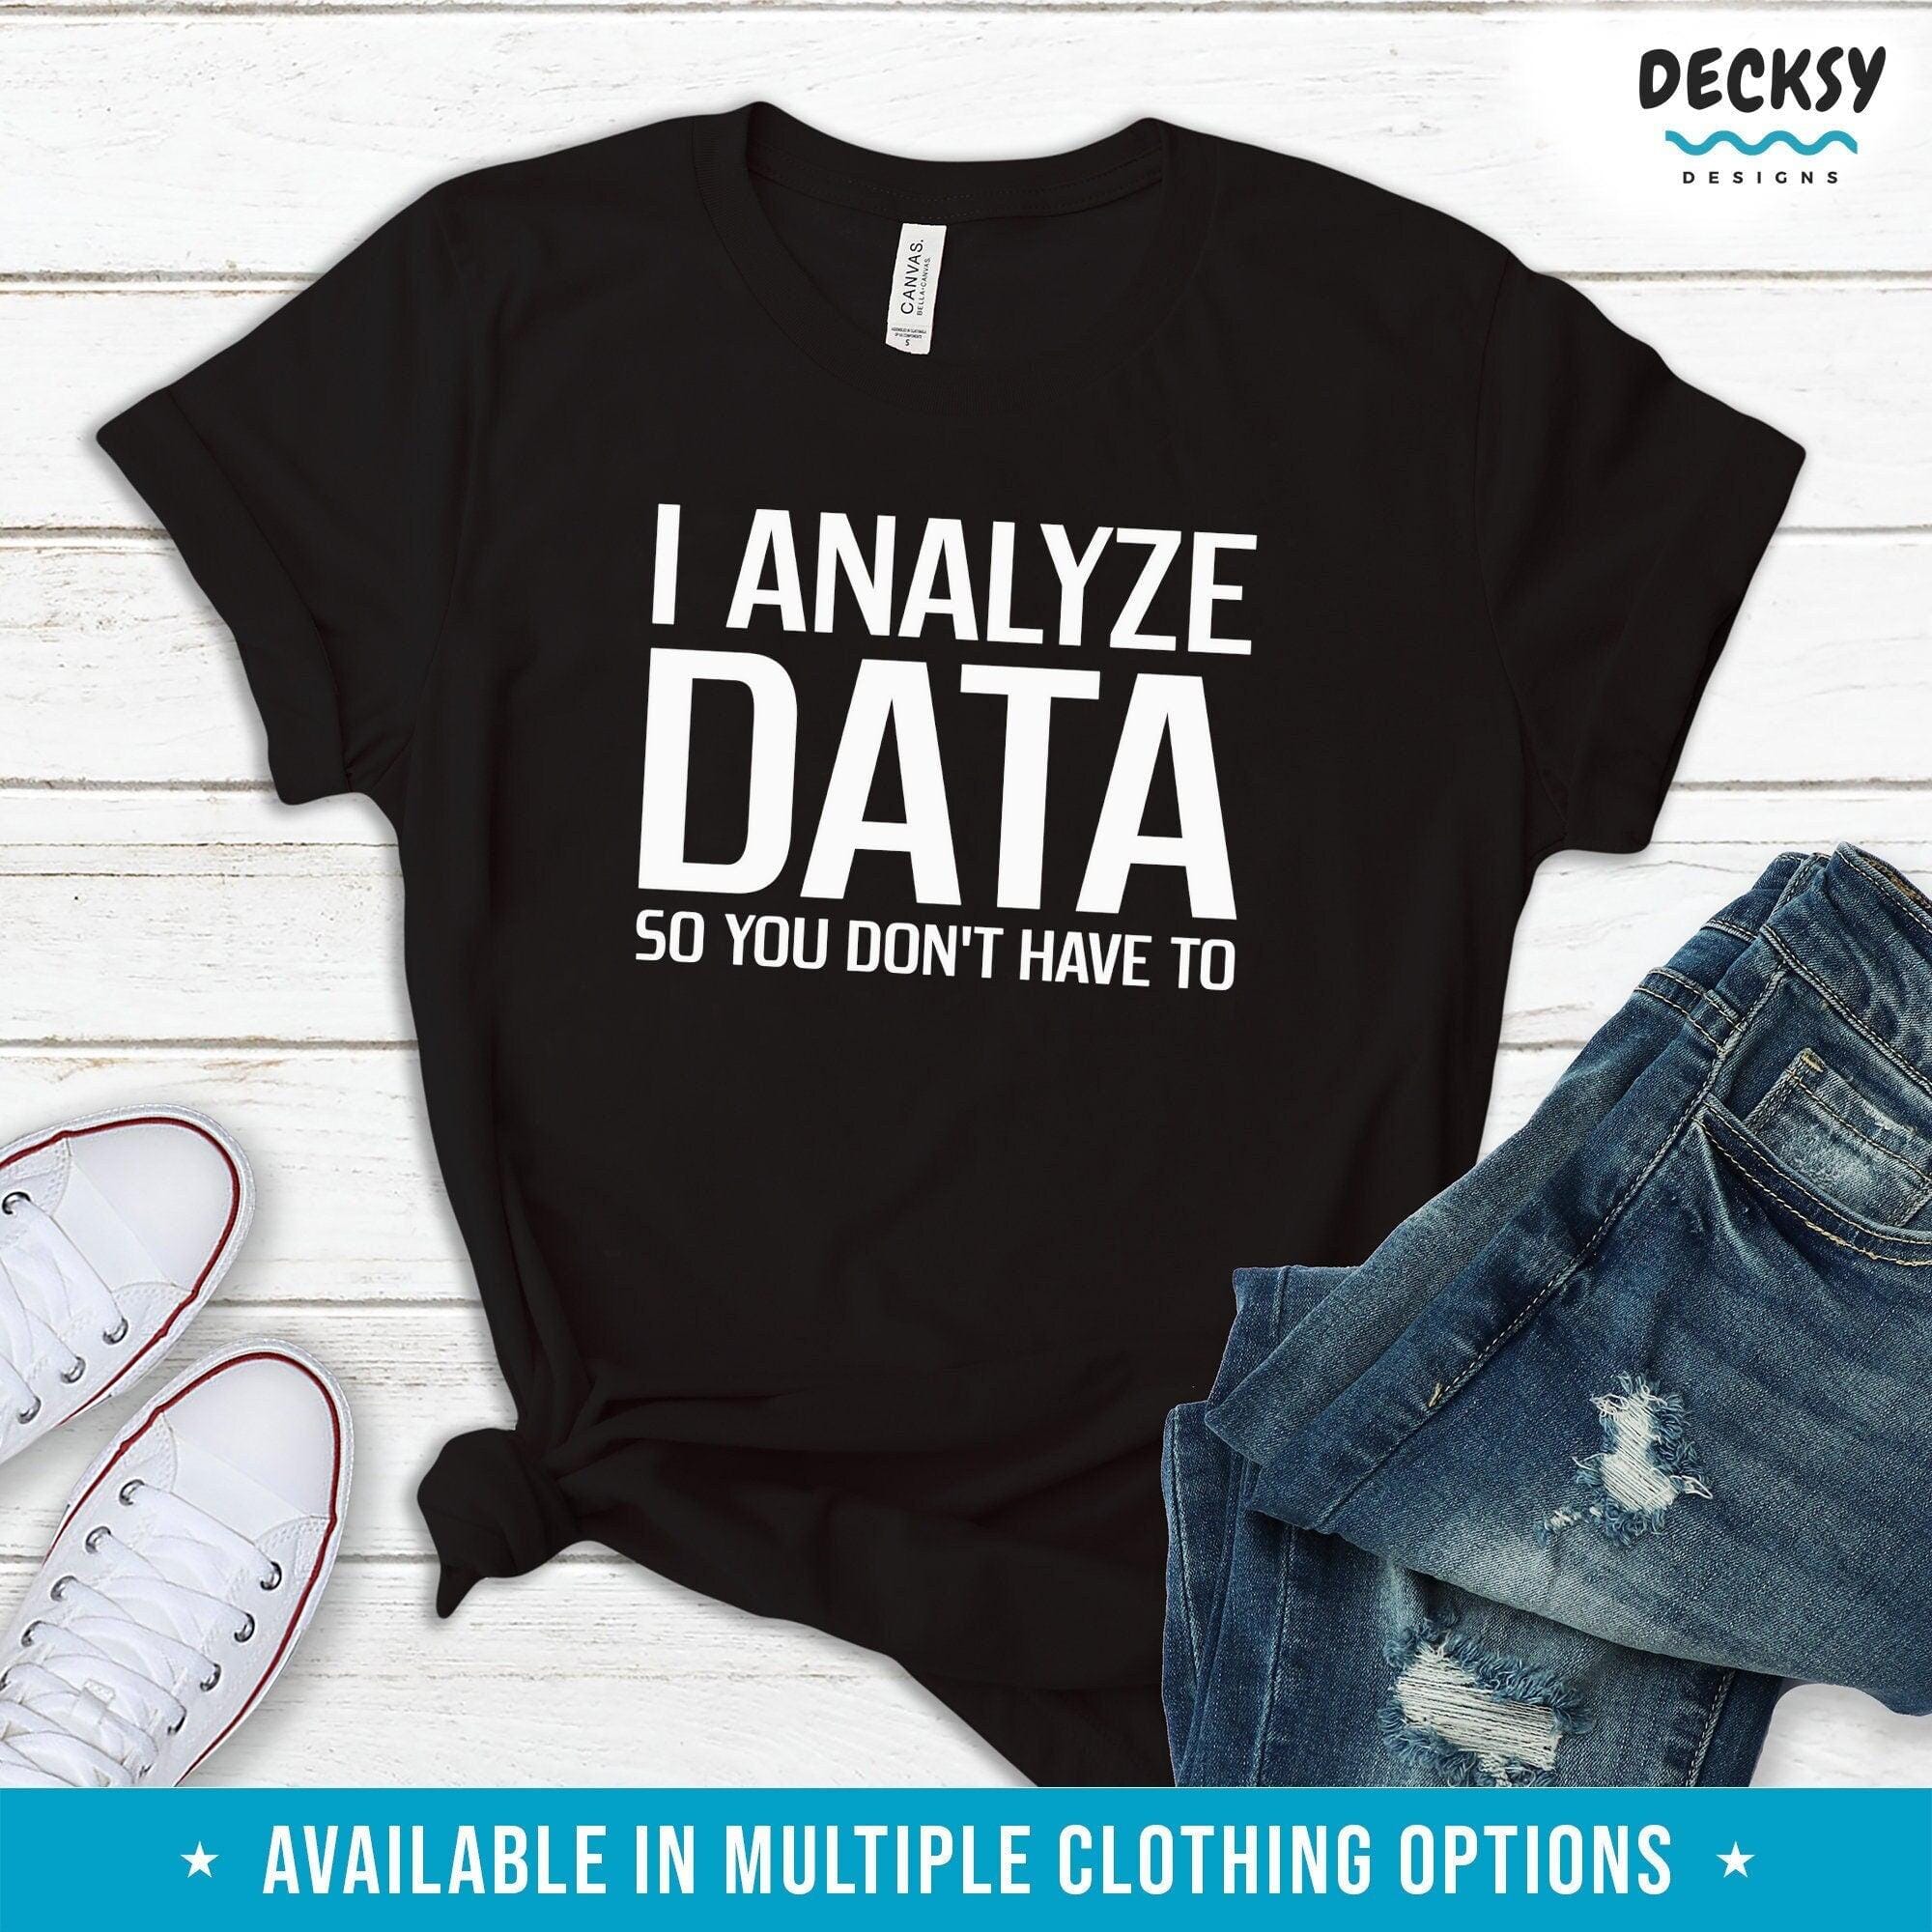 Data Analyst Shirt, Data Scientist Gift-Clothing:Gender-Neutral Adult Clothing:Tops & Tees:T-shirts:Graphic Tees-DecksyDesigns